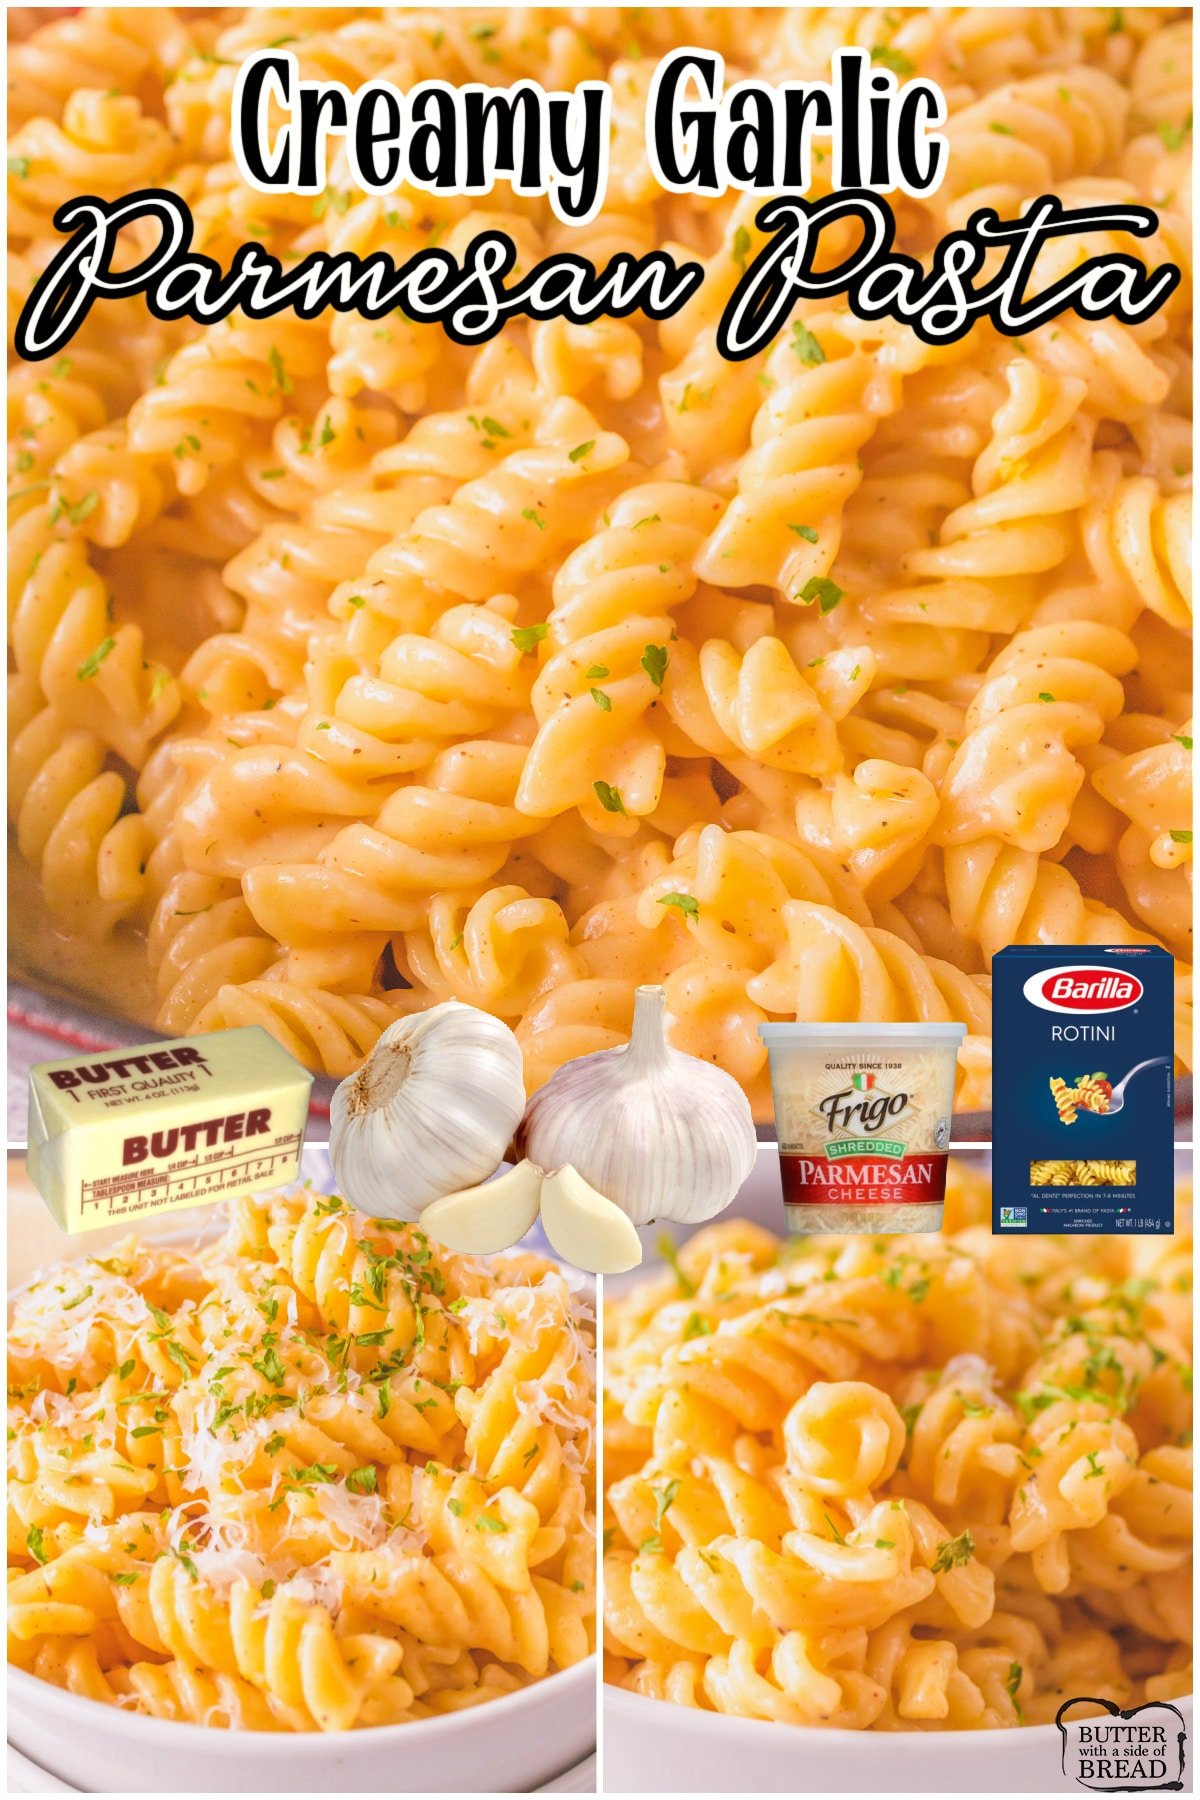 Creamy Garlic Parmesan Pasta made with Parmesan, garlic, butter, broth & simple seasonings for an easy, flavorful pasta dinner. This creamy parmesan pasta sauce is made from scratch and has the wonderful flavors of cheese and garlic in every bite.